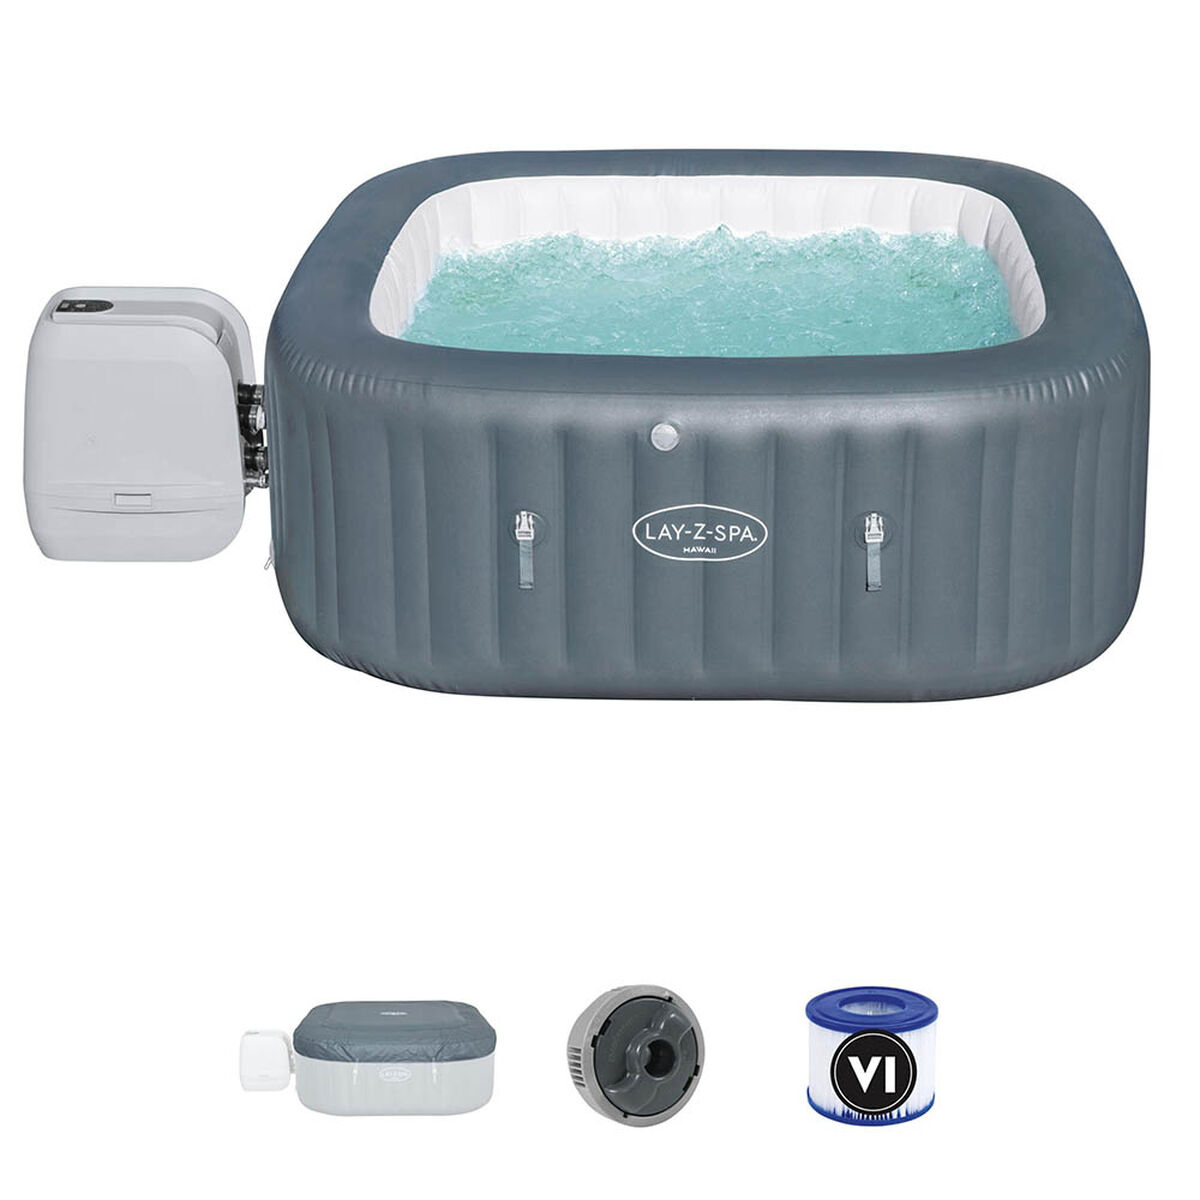 Spa Inflable Hawaii Hydrojet Pro Lay-z Bestway 6 Personas